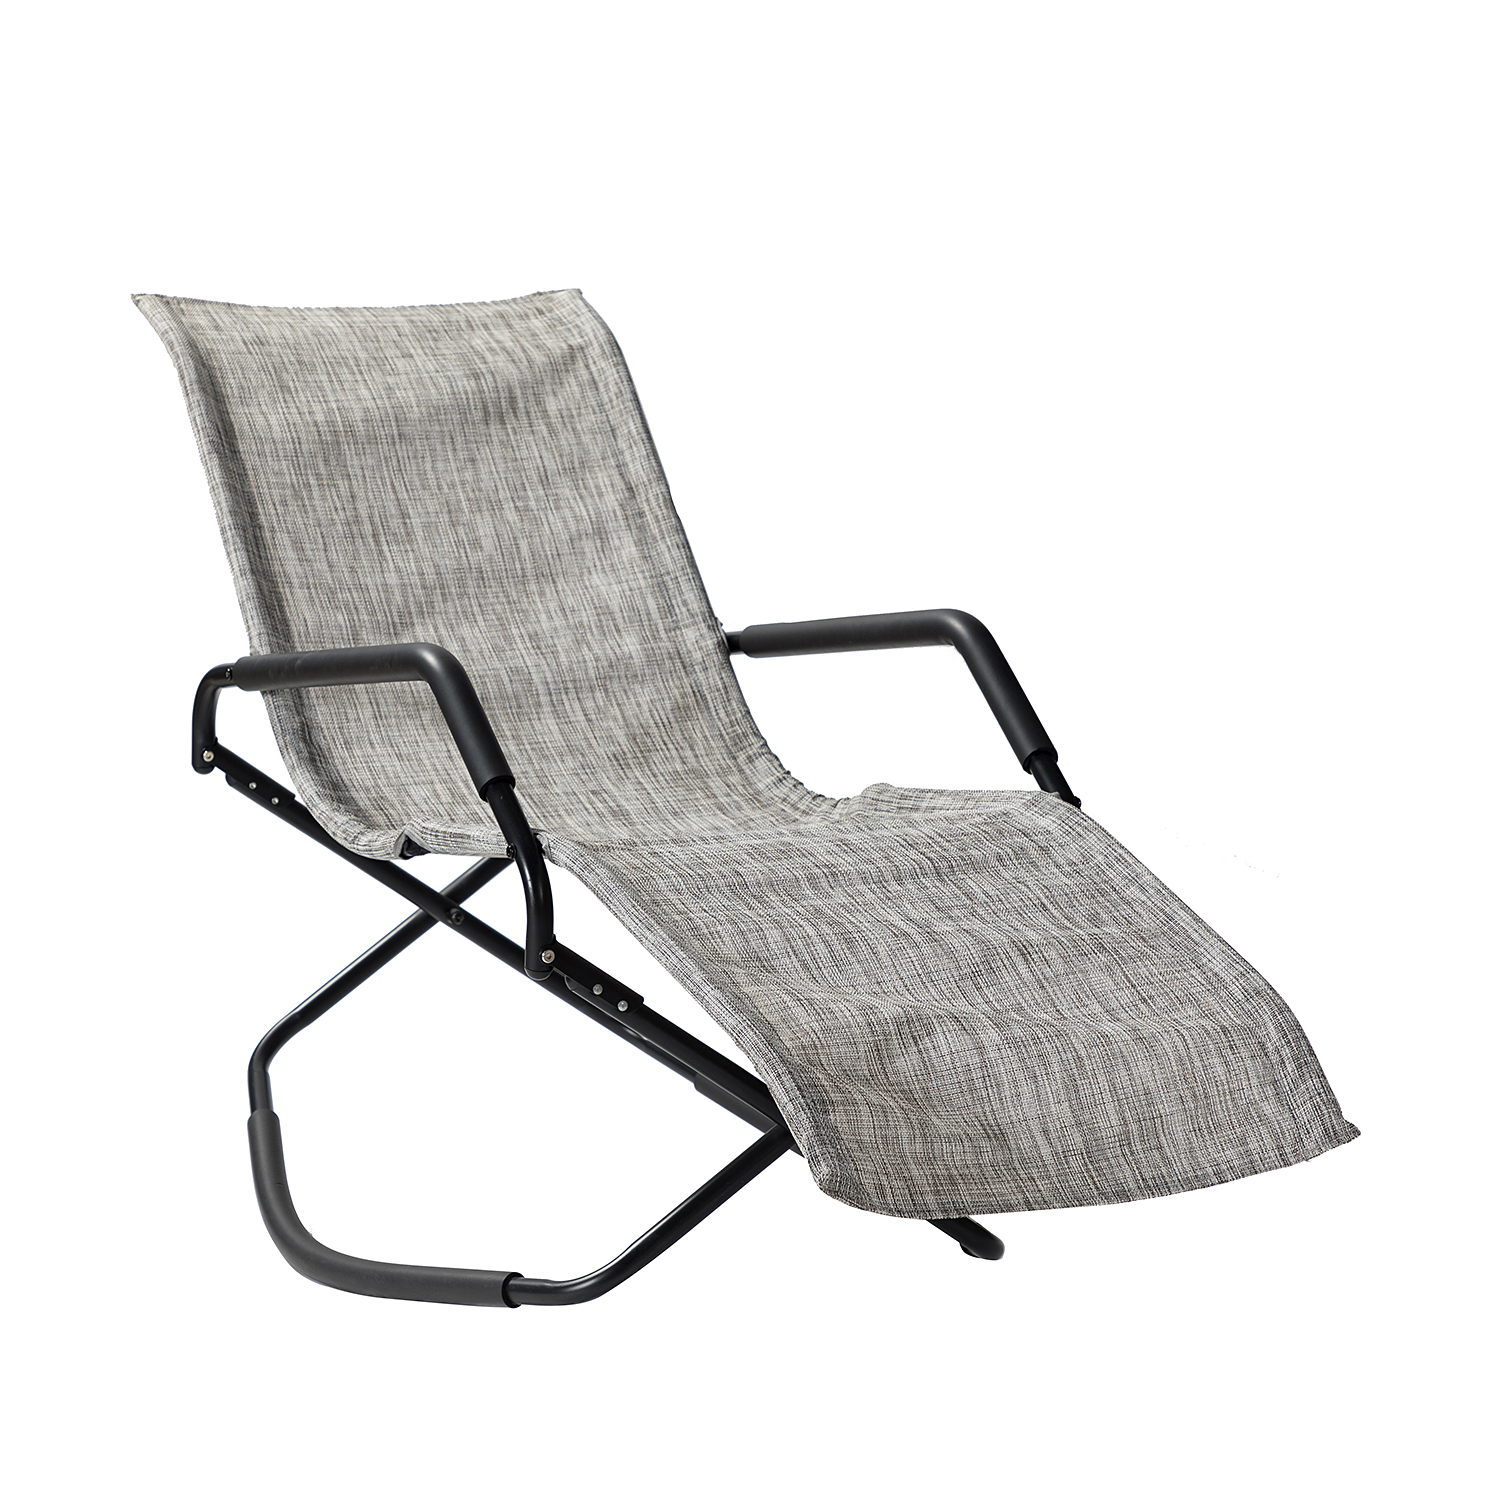 SYNGAR Lounge Chaise Chair, Folding Portable Chaise Chair for Outdoor, Patio Rocking Reclining Chair with Lightweight Design, Camping Beach Chair with Armrest, Lounge Chair for Pool, Lawn, Deck, D7846 - image 2 of 10